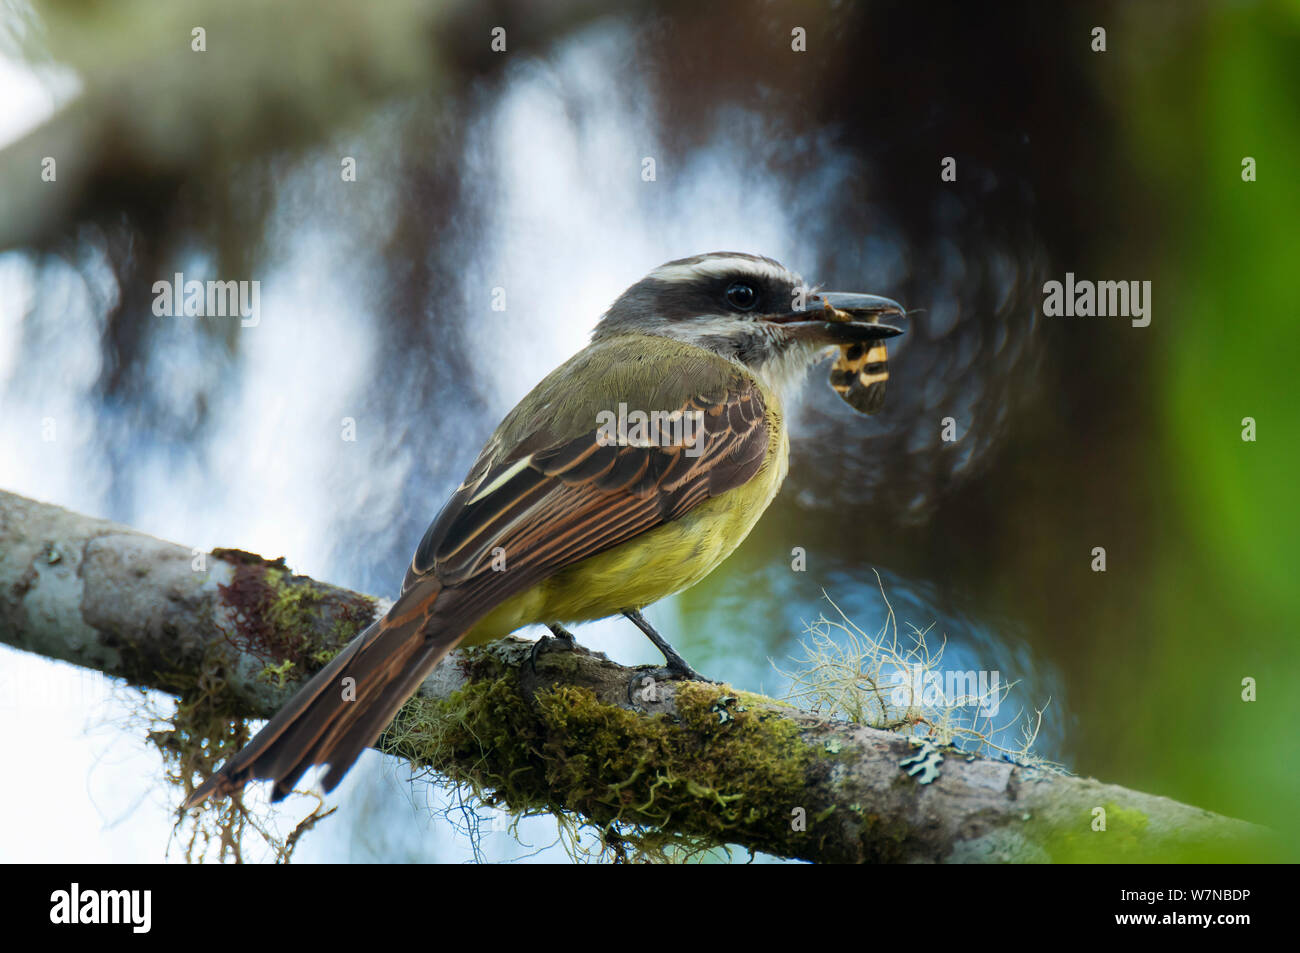 Golden crowned flycatcher (Myiodynastes chrysocephalus) with insect prey in beak, Bellavista cloud forest private reserve, 1700m altitude, Tandayapa Valley, Andean cloud forest, Ecuador Stock Photo